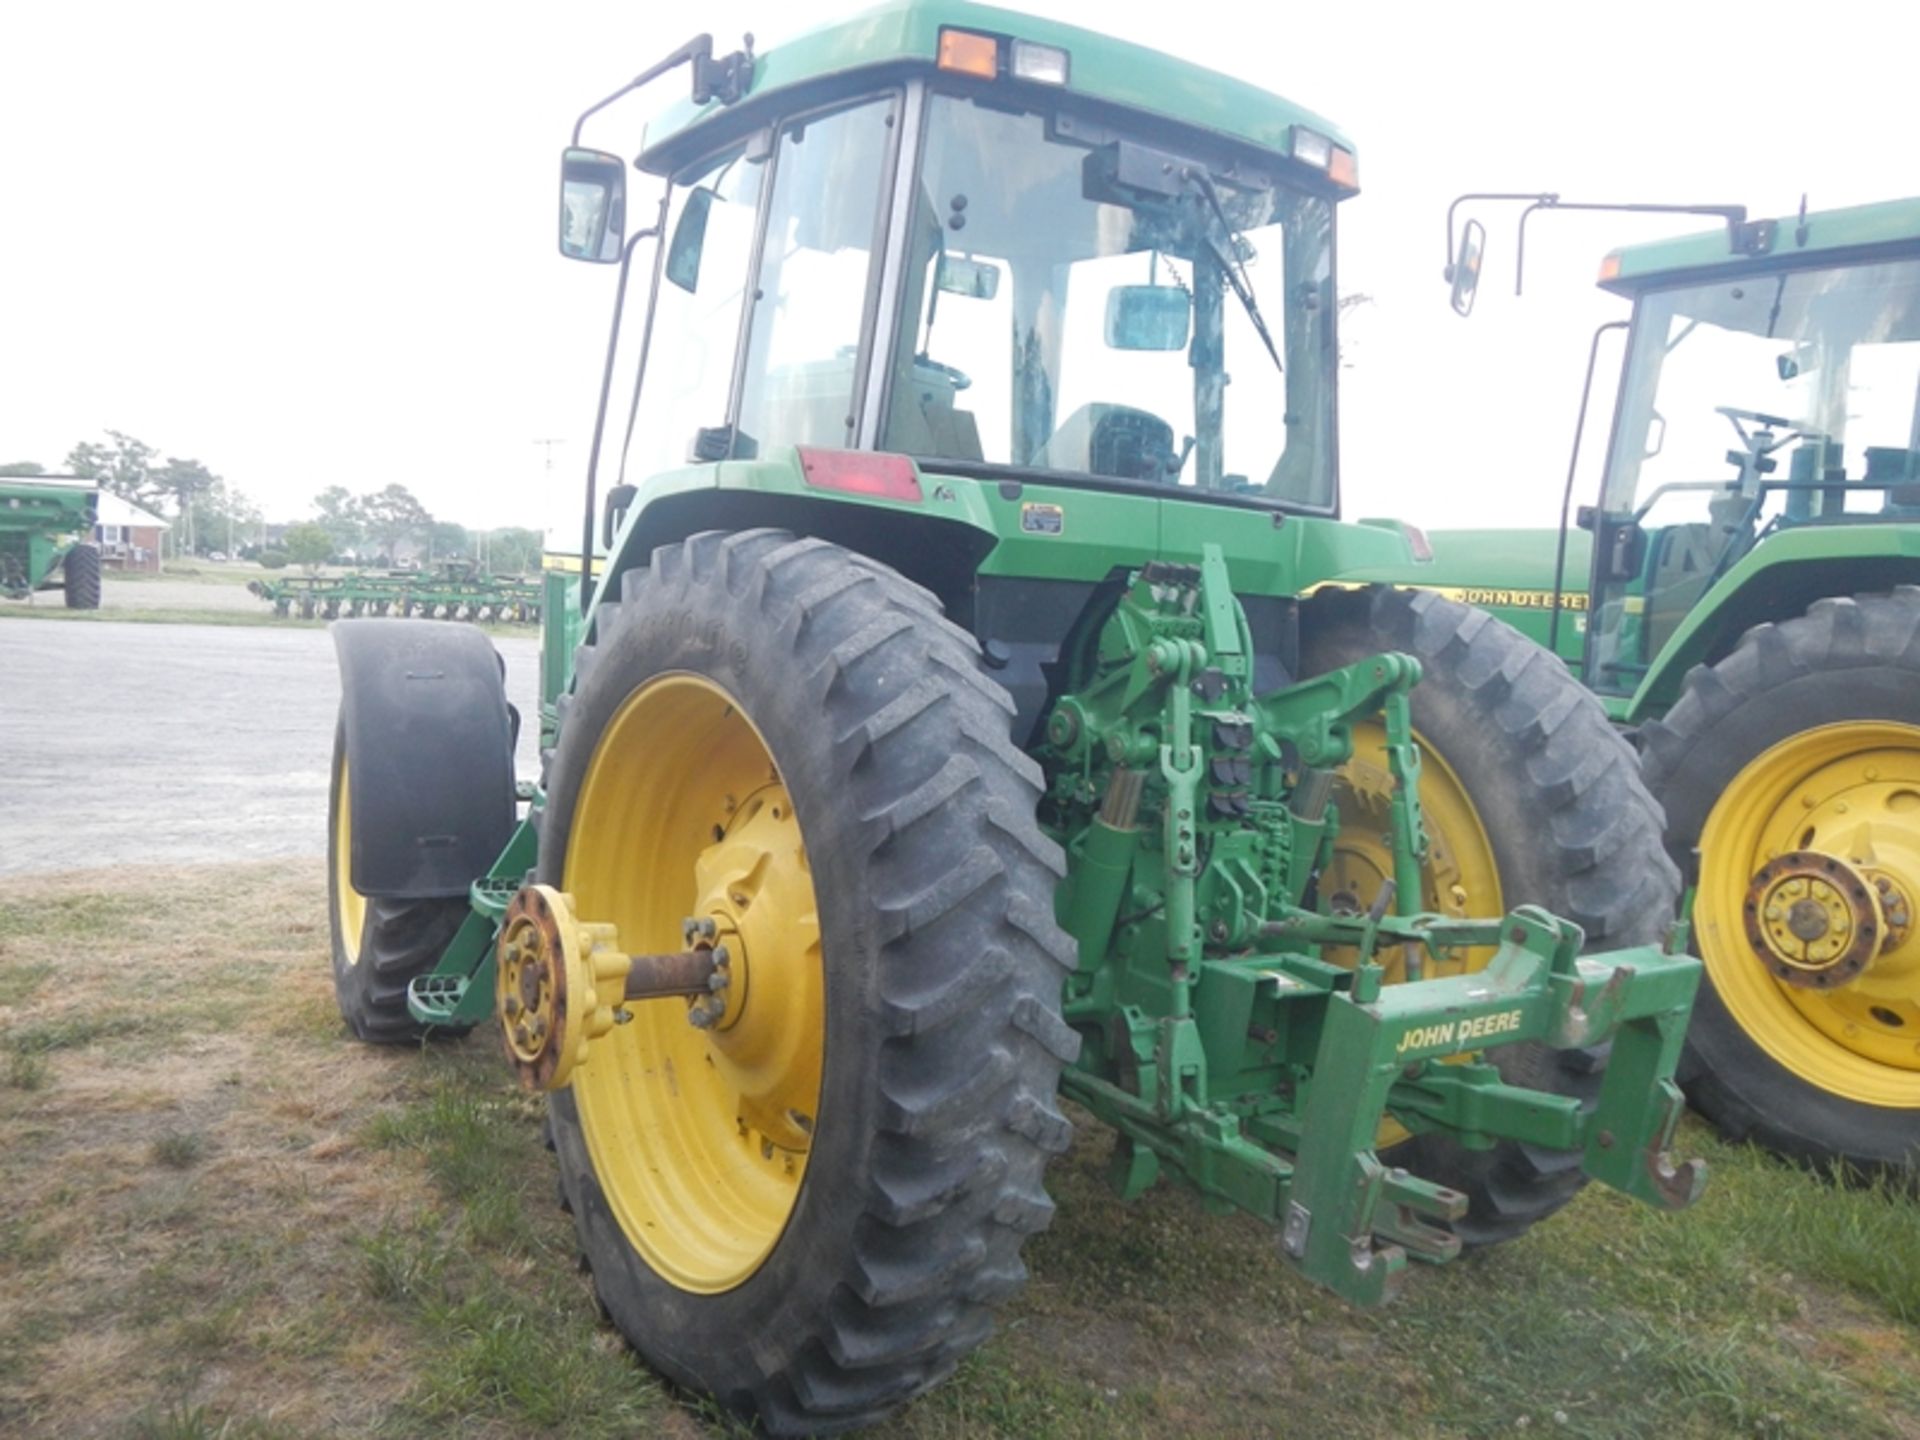 JOHN DEERE 7410 tractor - 4wd, 14.9R46 duals - 2,654 hrs - Serial RW7410H07342 - Image 4 of 6